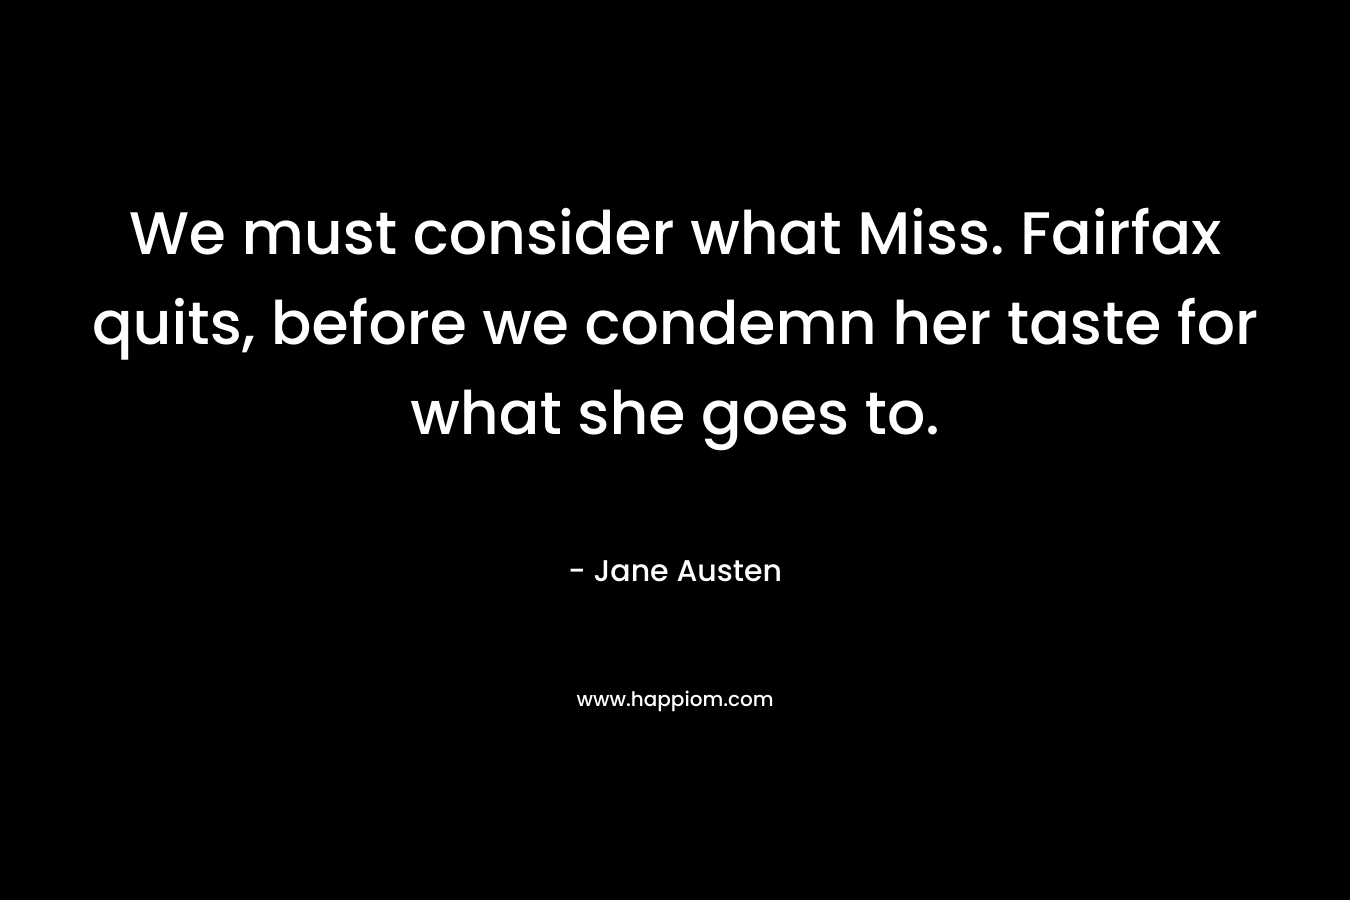 We must consider what Miss. Fairfax quits, before we condemn her taste for what she goes to. – Jane Austen